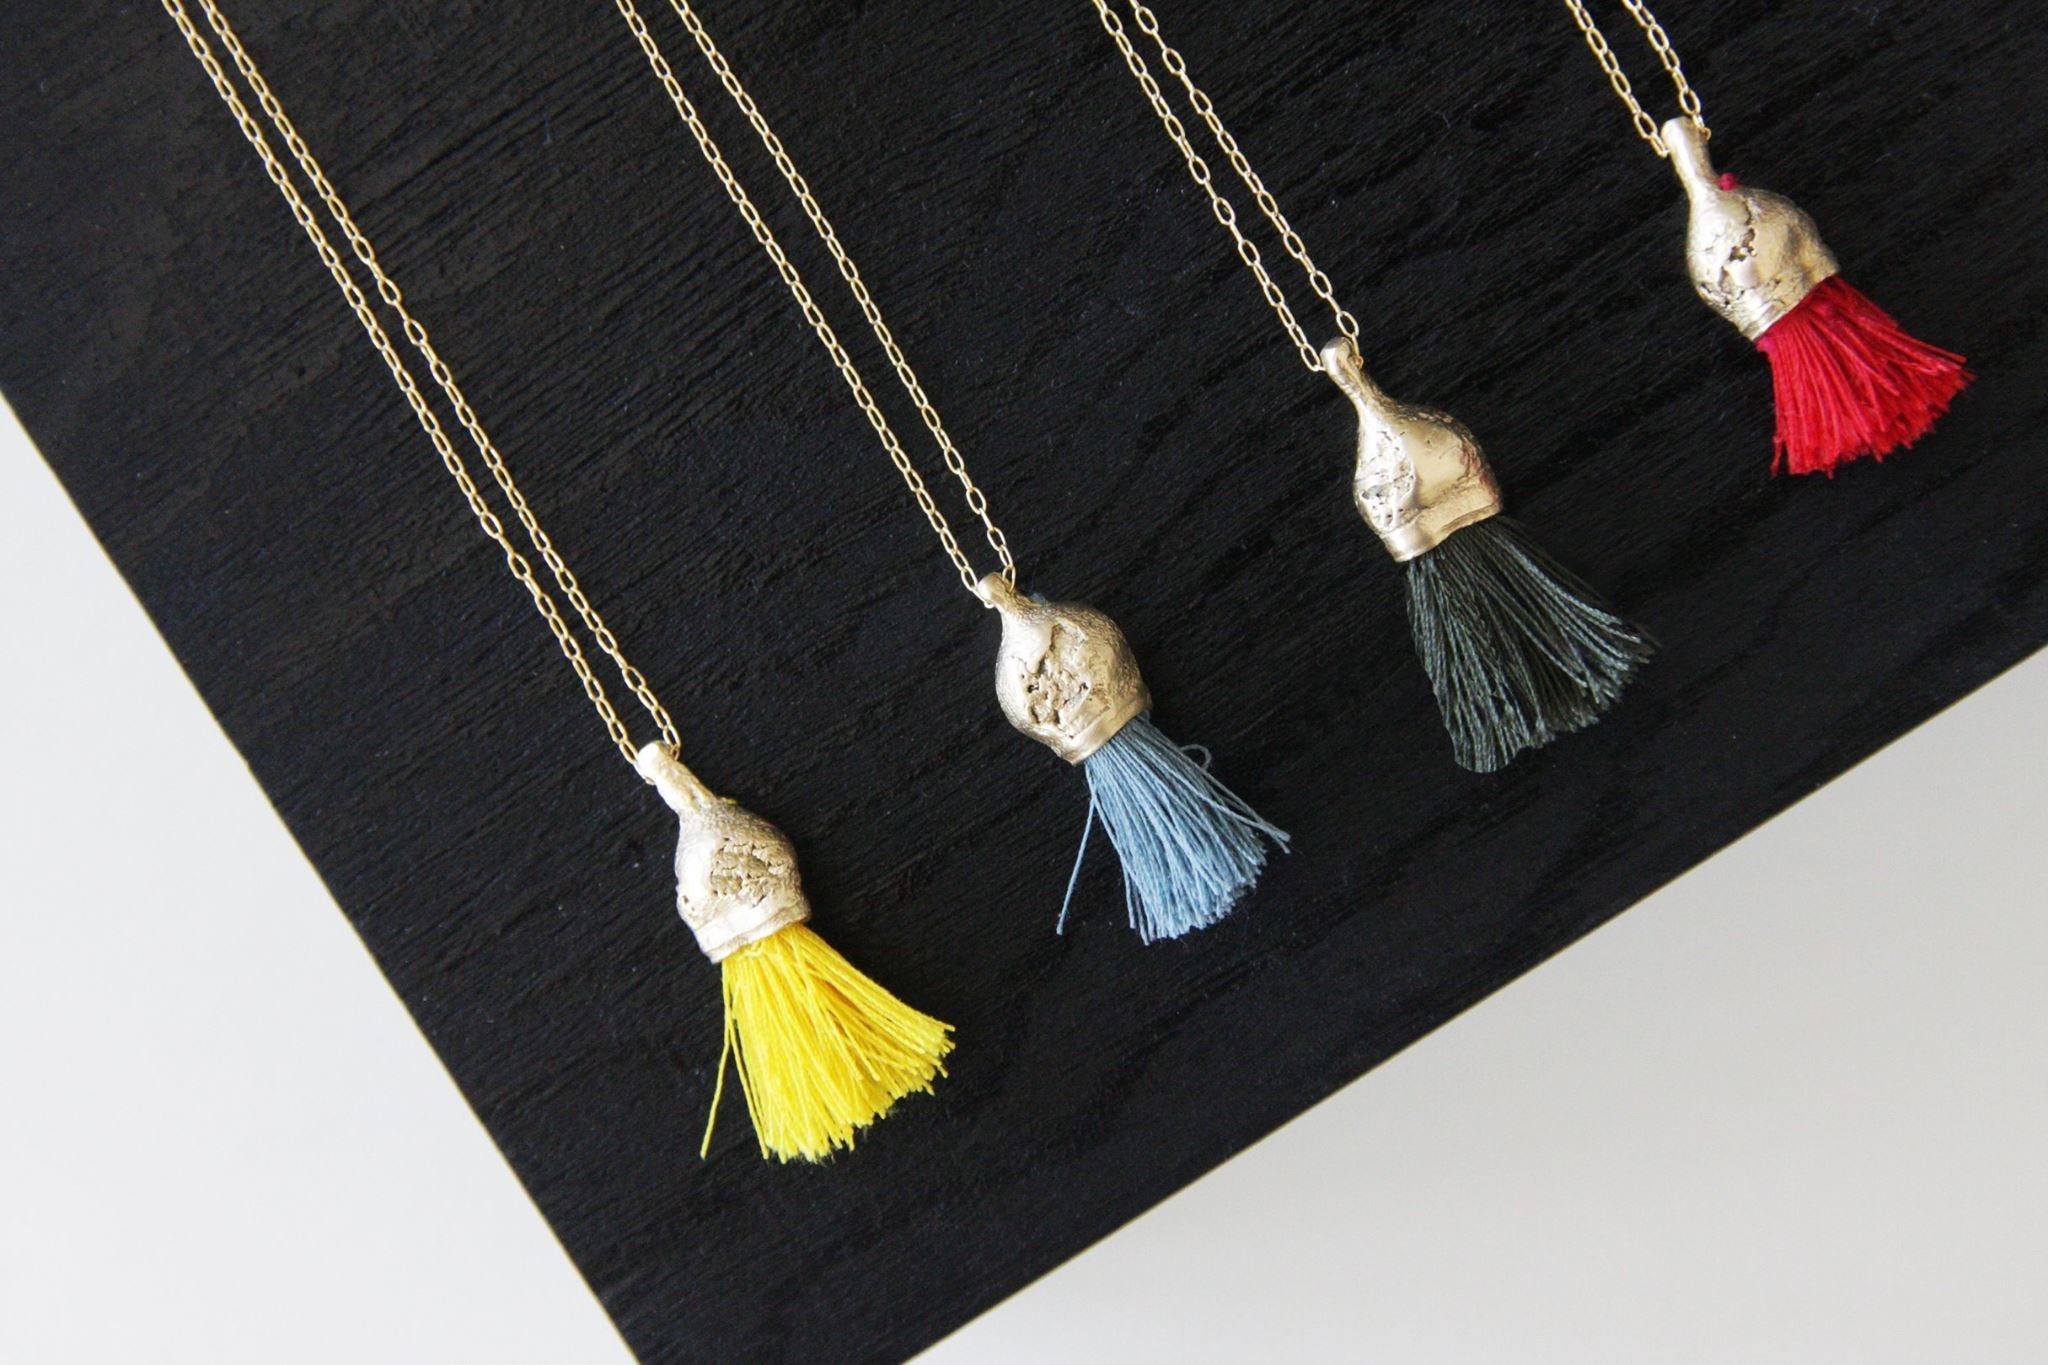 Nature Necklace / Red Tassel Necklace / Gold And Cotton Pendant / Organic Necklace / Gold Charm Pendant - hs